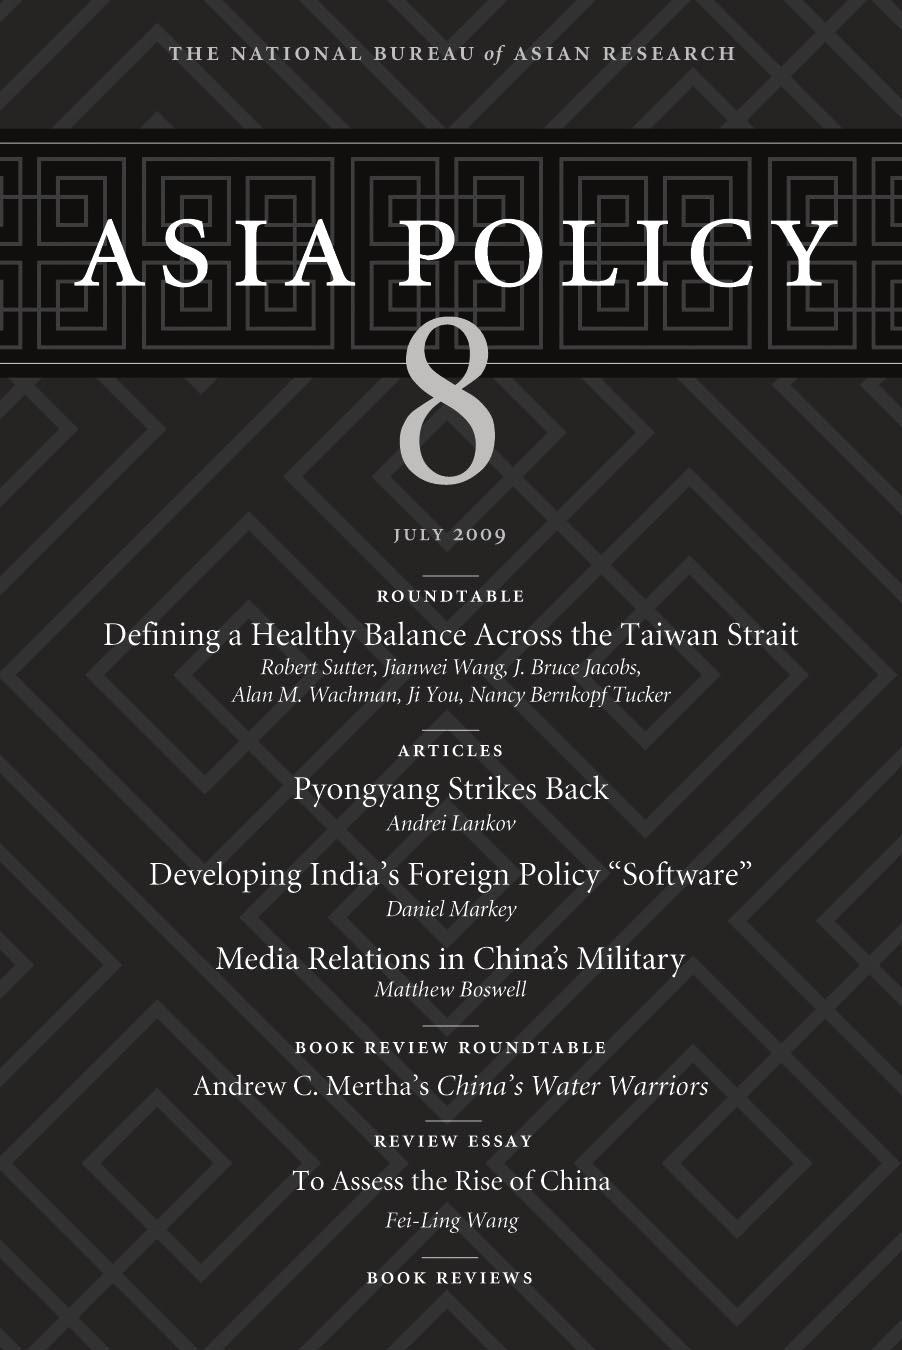 asia policy A peer-reviewed journal devoted to bridging the gap between academic research and policymaking on issues related to the Asia-Pacific Asia Policy publishes, in descending order of